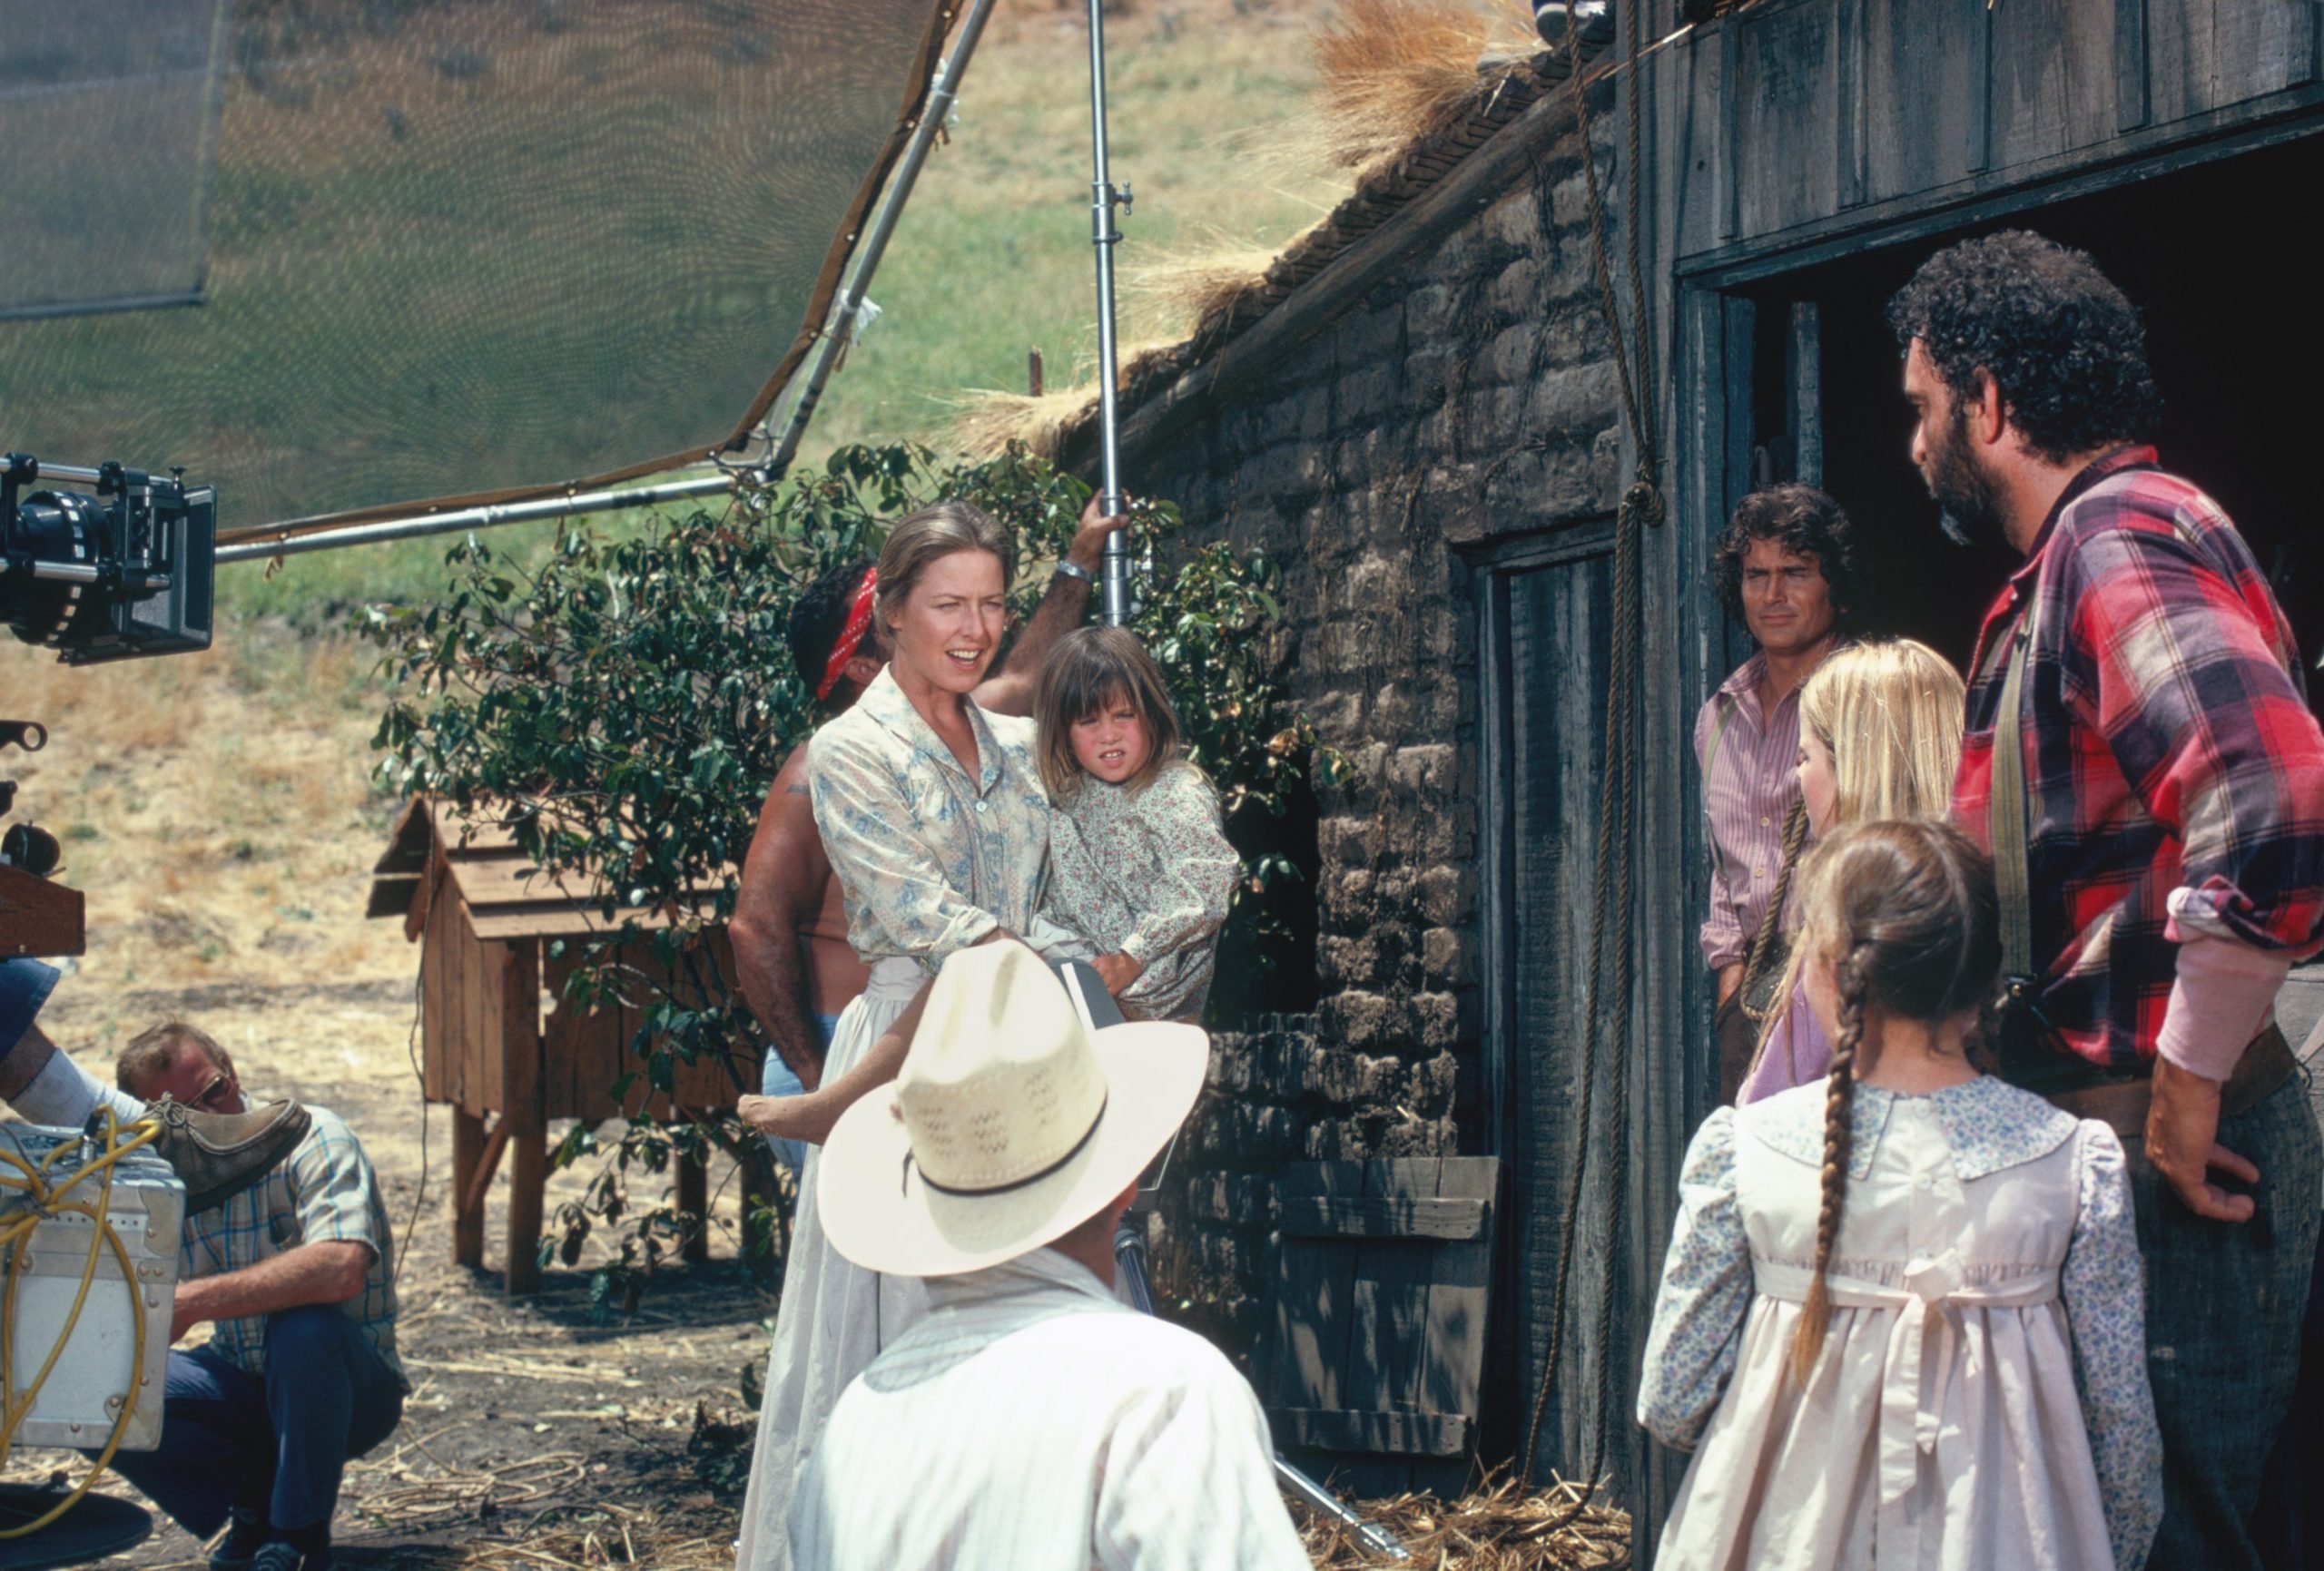 Karen Grassle, Michael Landon, and the Little House on the Prairie cast during a scene.